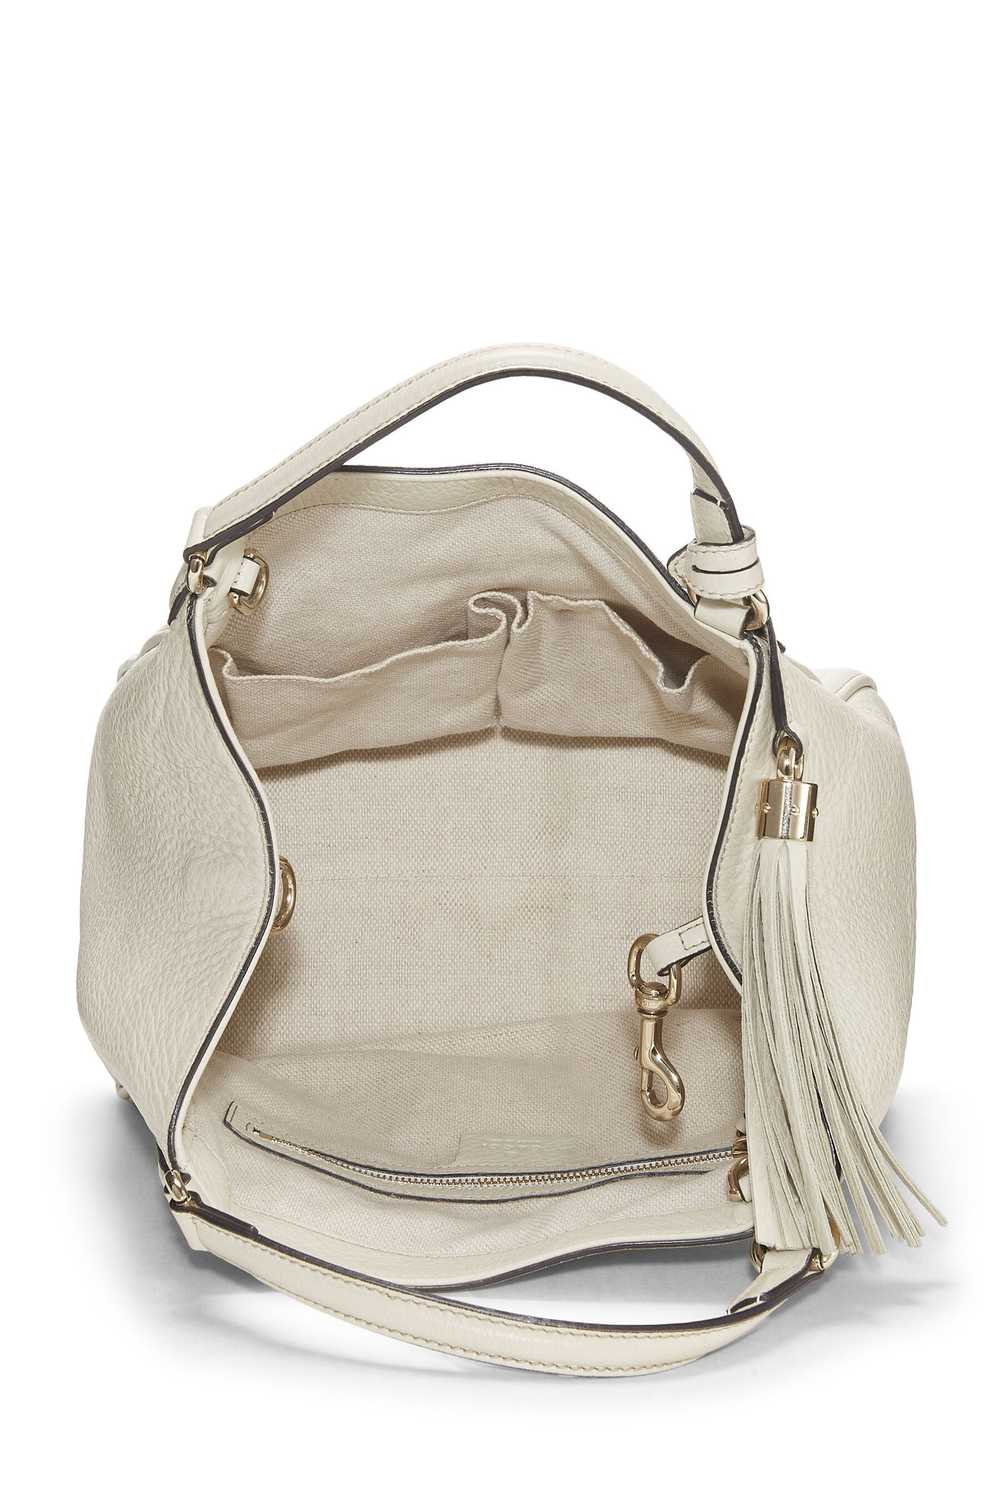 White Leather Soho Convertible Shoulder Bag Small - image 6